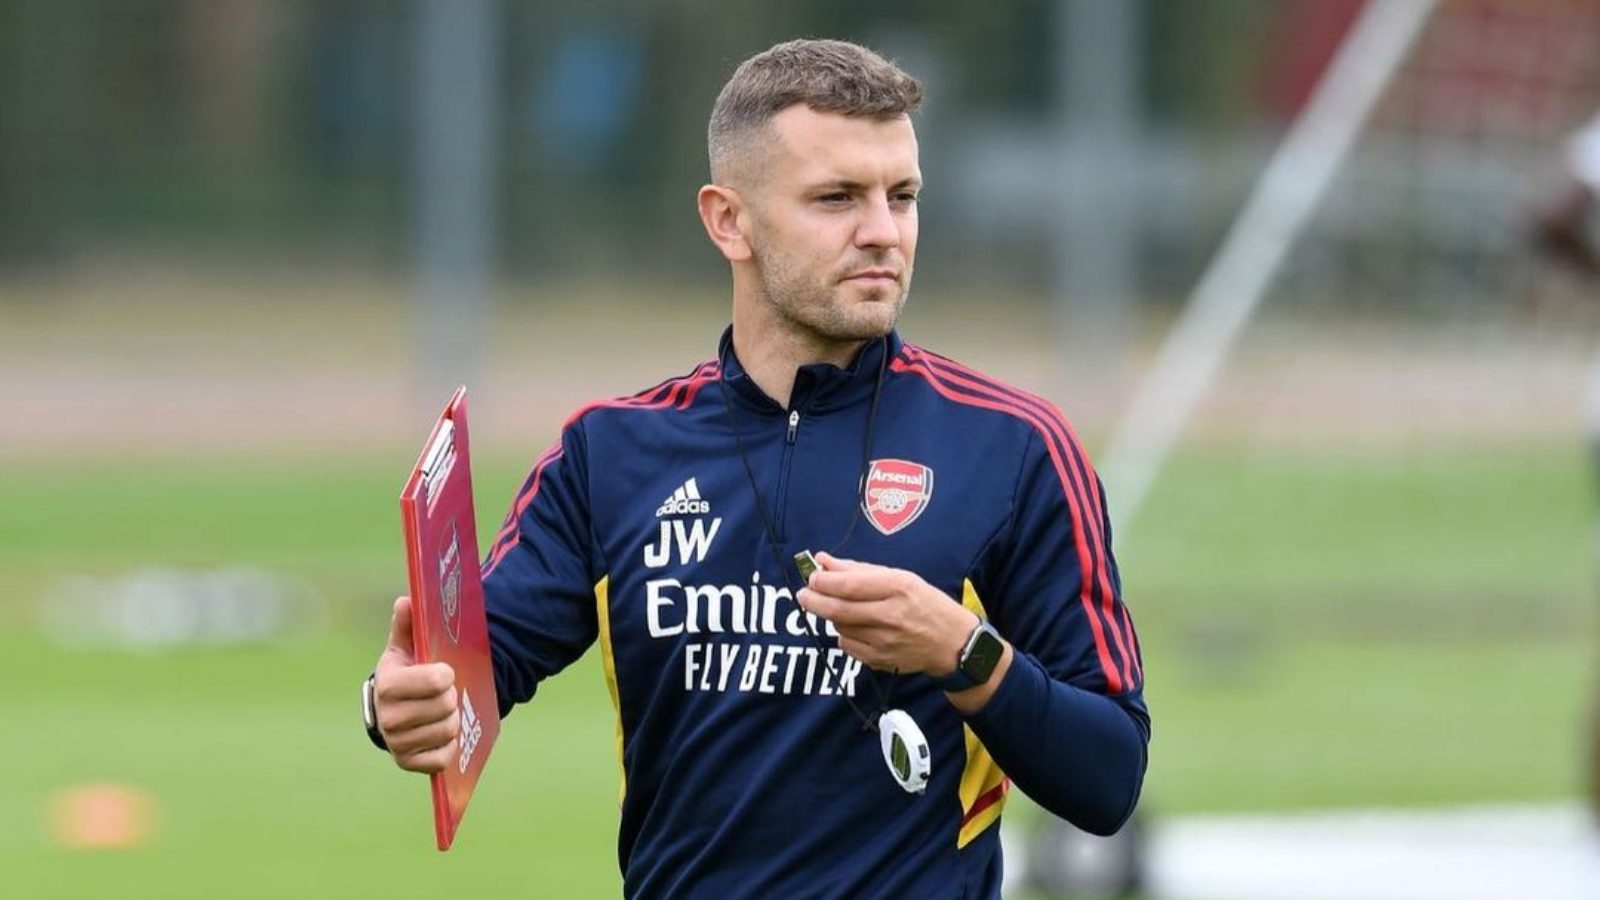 Jack Wilshere tips 14-year-old to be fast-tracked to the Arsenal first team after recent displays